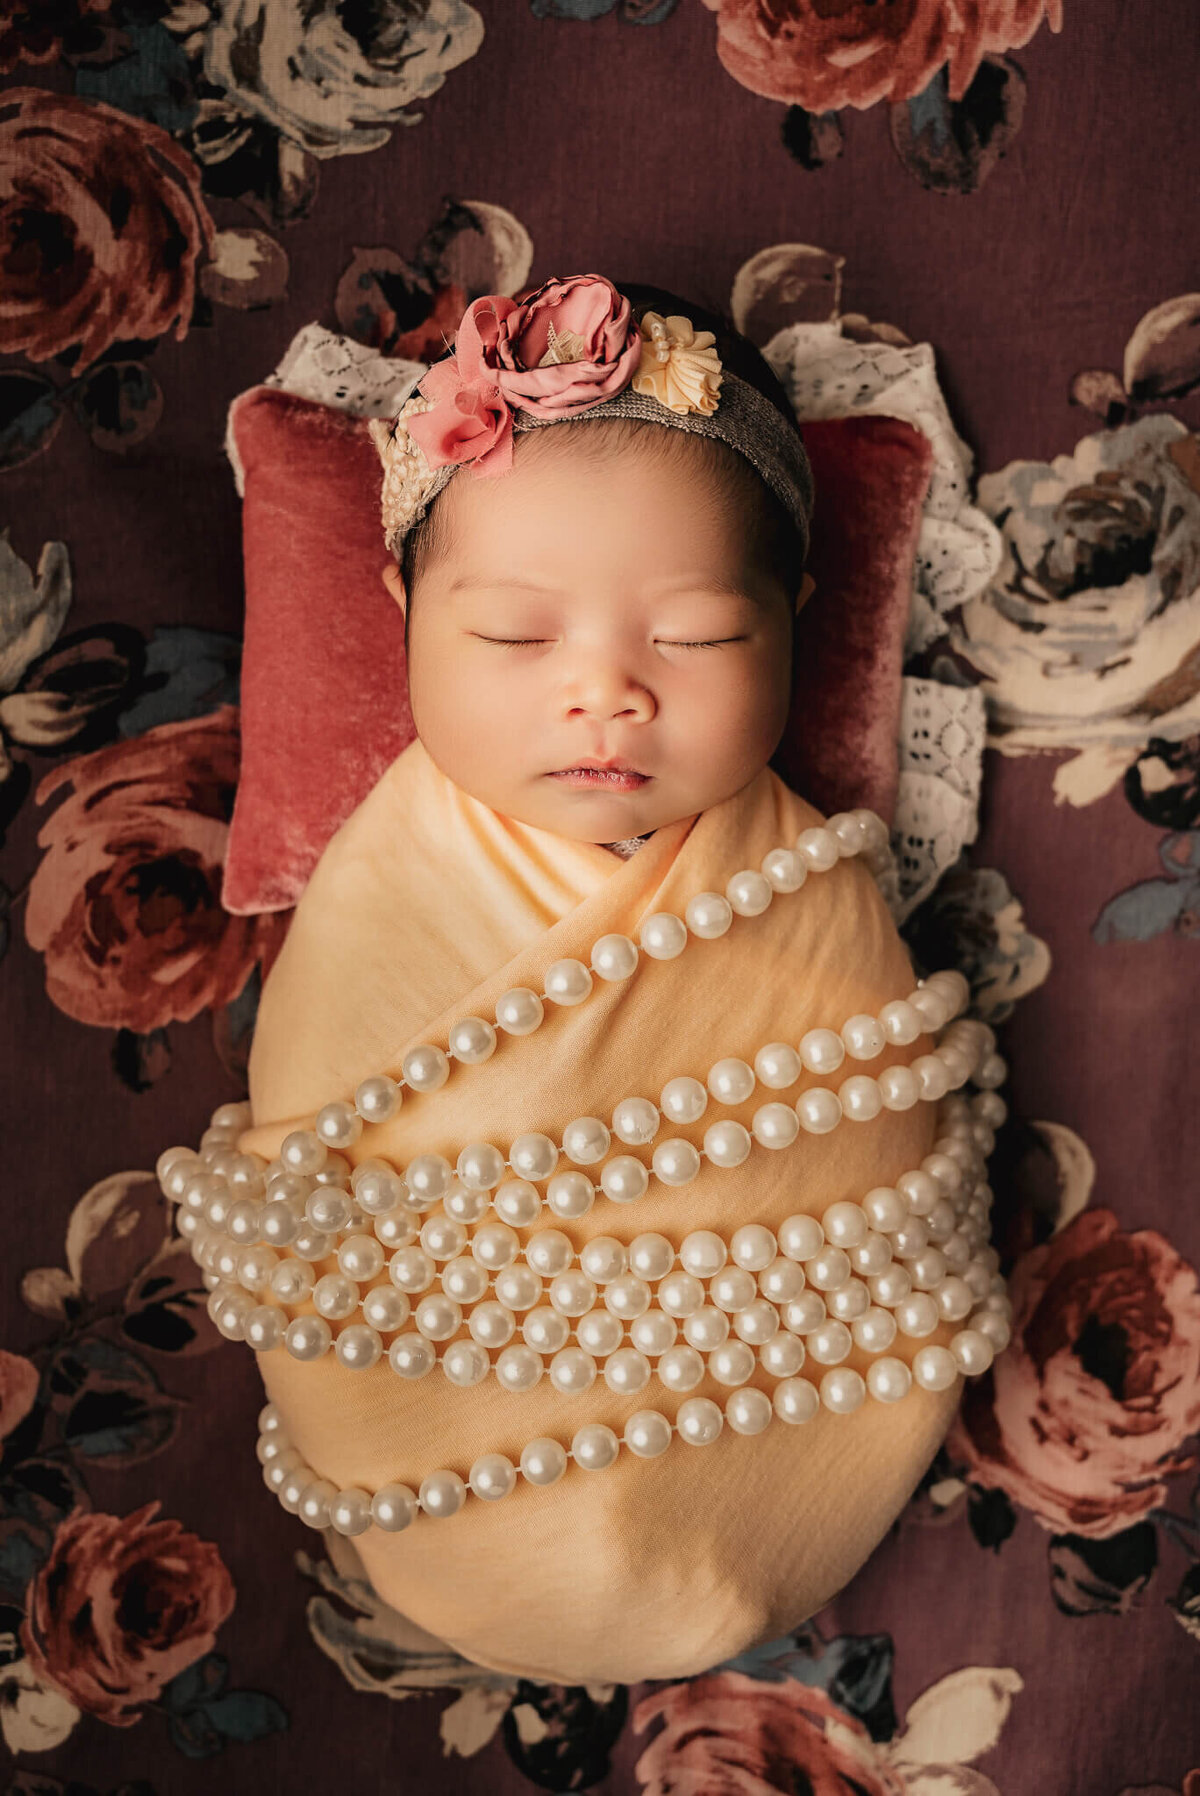 Infant girl wrapped in a peach wrap with white pearls sleeping on a rose patterned backdrop.